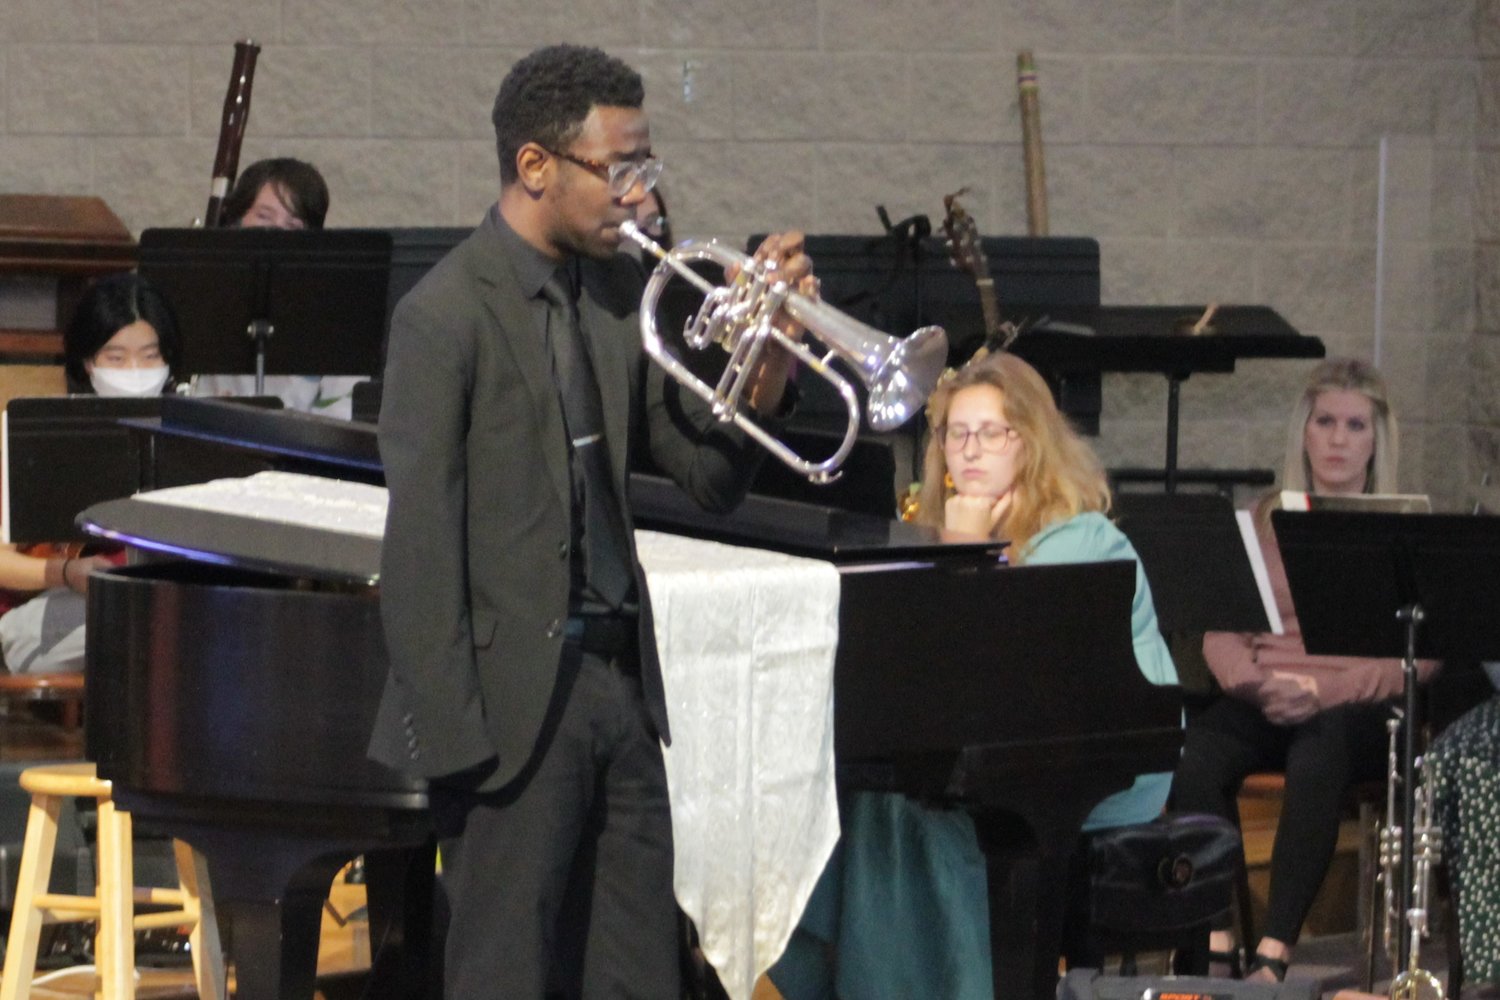 Trumpeter and composer Carlot Dorvé plays a powerful rendition of “You Raise Me Up” during the Fr. Tolton Legacy Society’s 2022 Celebration Mass in the St. Thomas More Newman Center Chapel in Columbia on May 1.